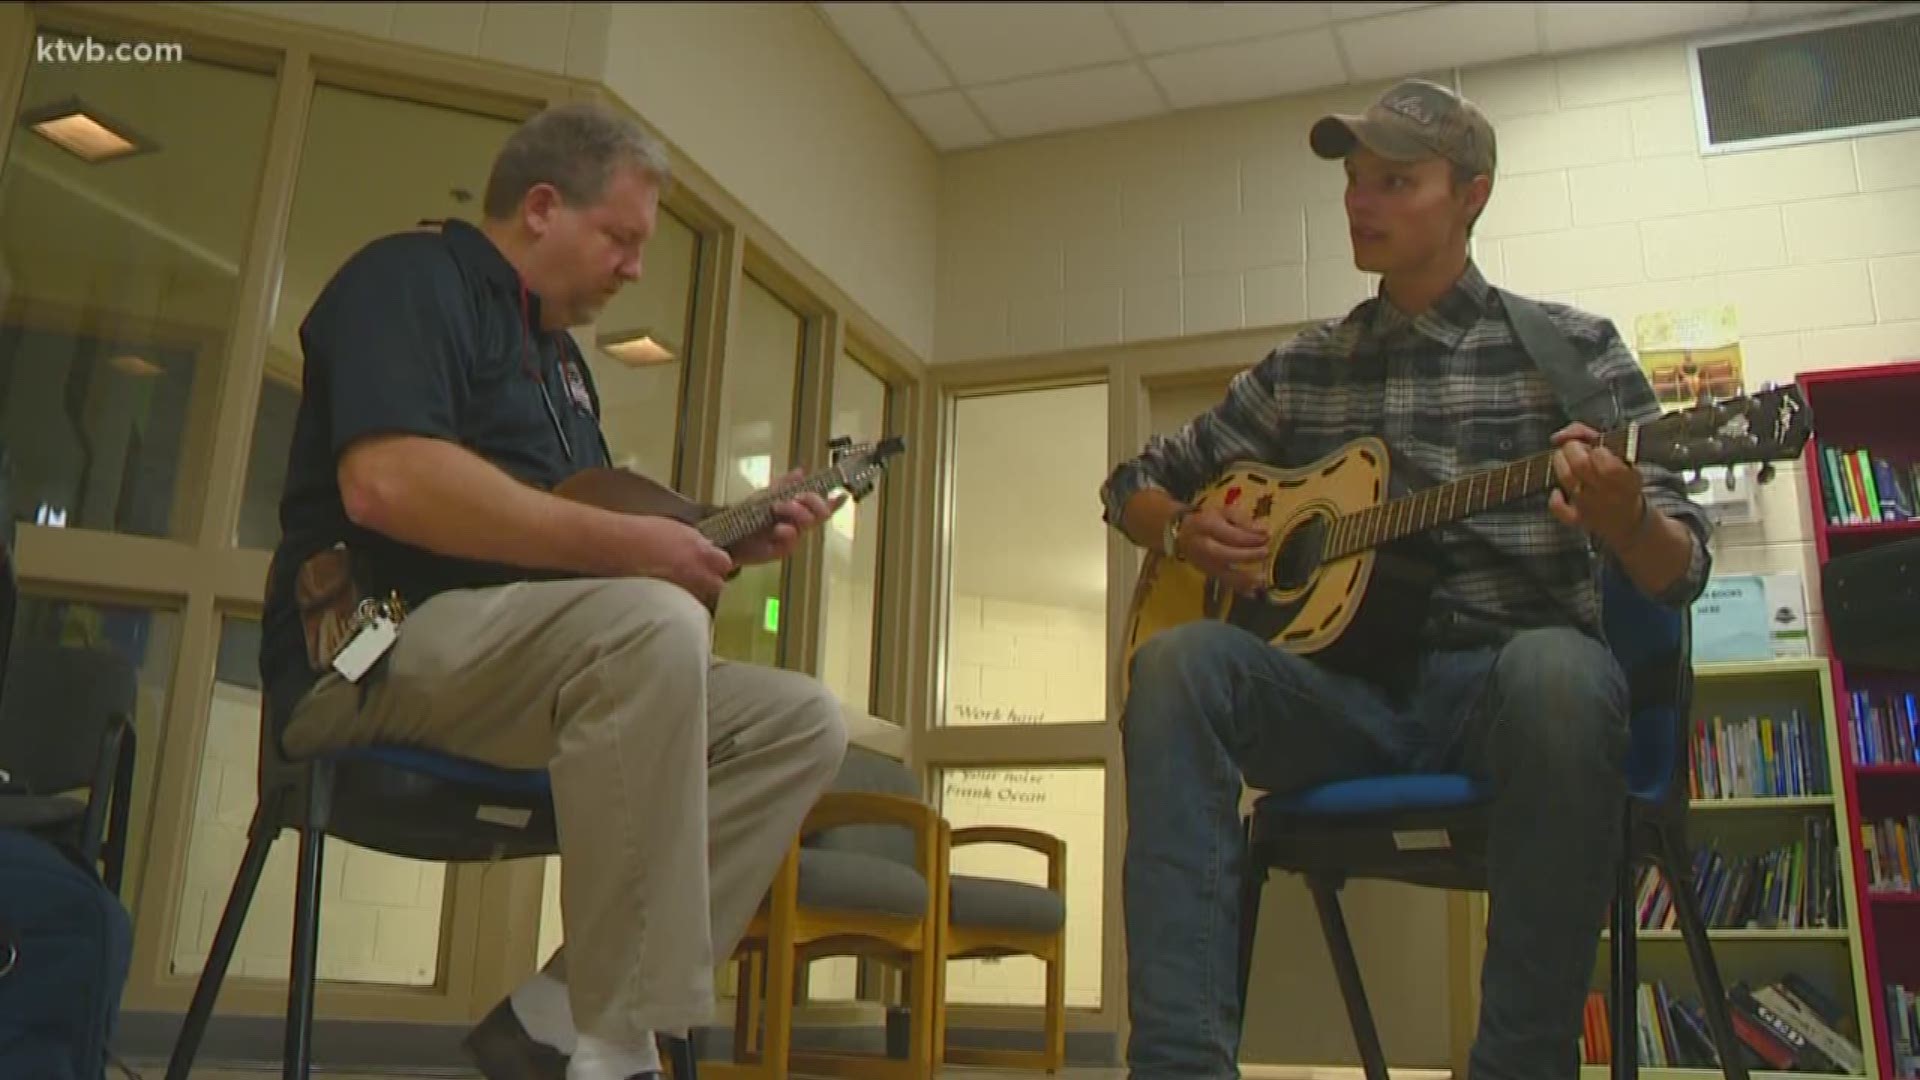 Bill Dorsey is a shift supervisor at the Ada County Juvenile Detention Center. But, instead of being an adversary for those who stay there, he's helping to improve their young lives - by teaching them the art of music.